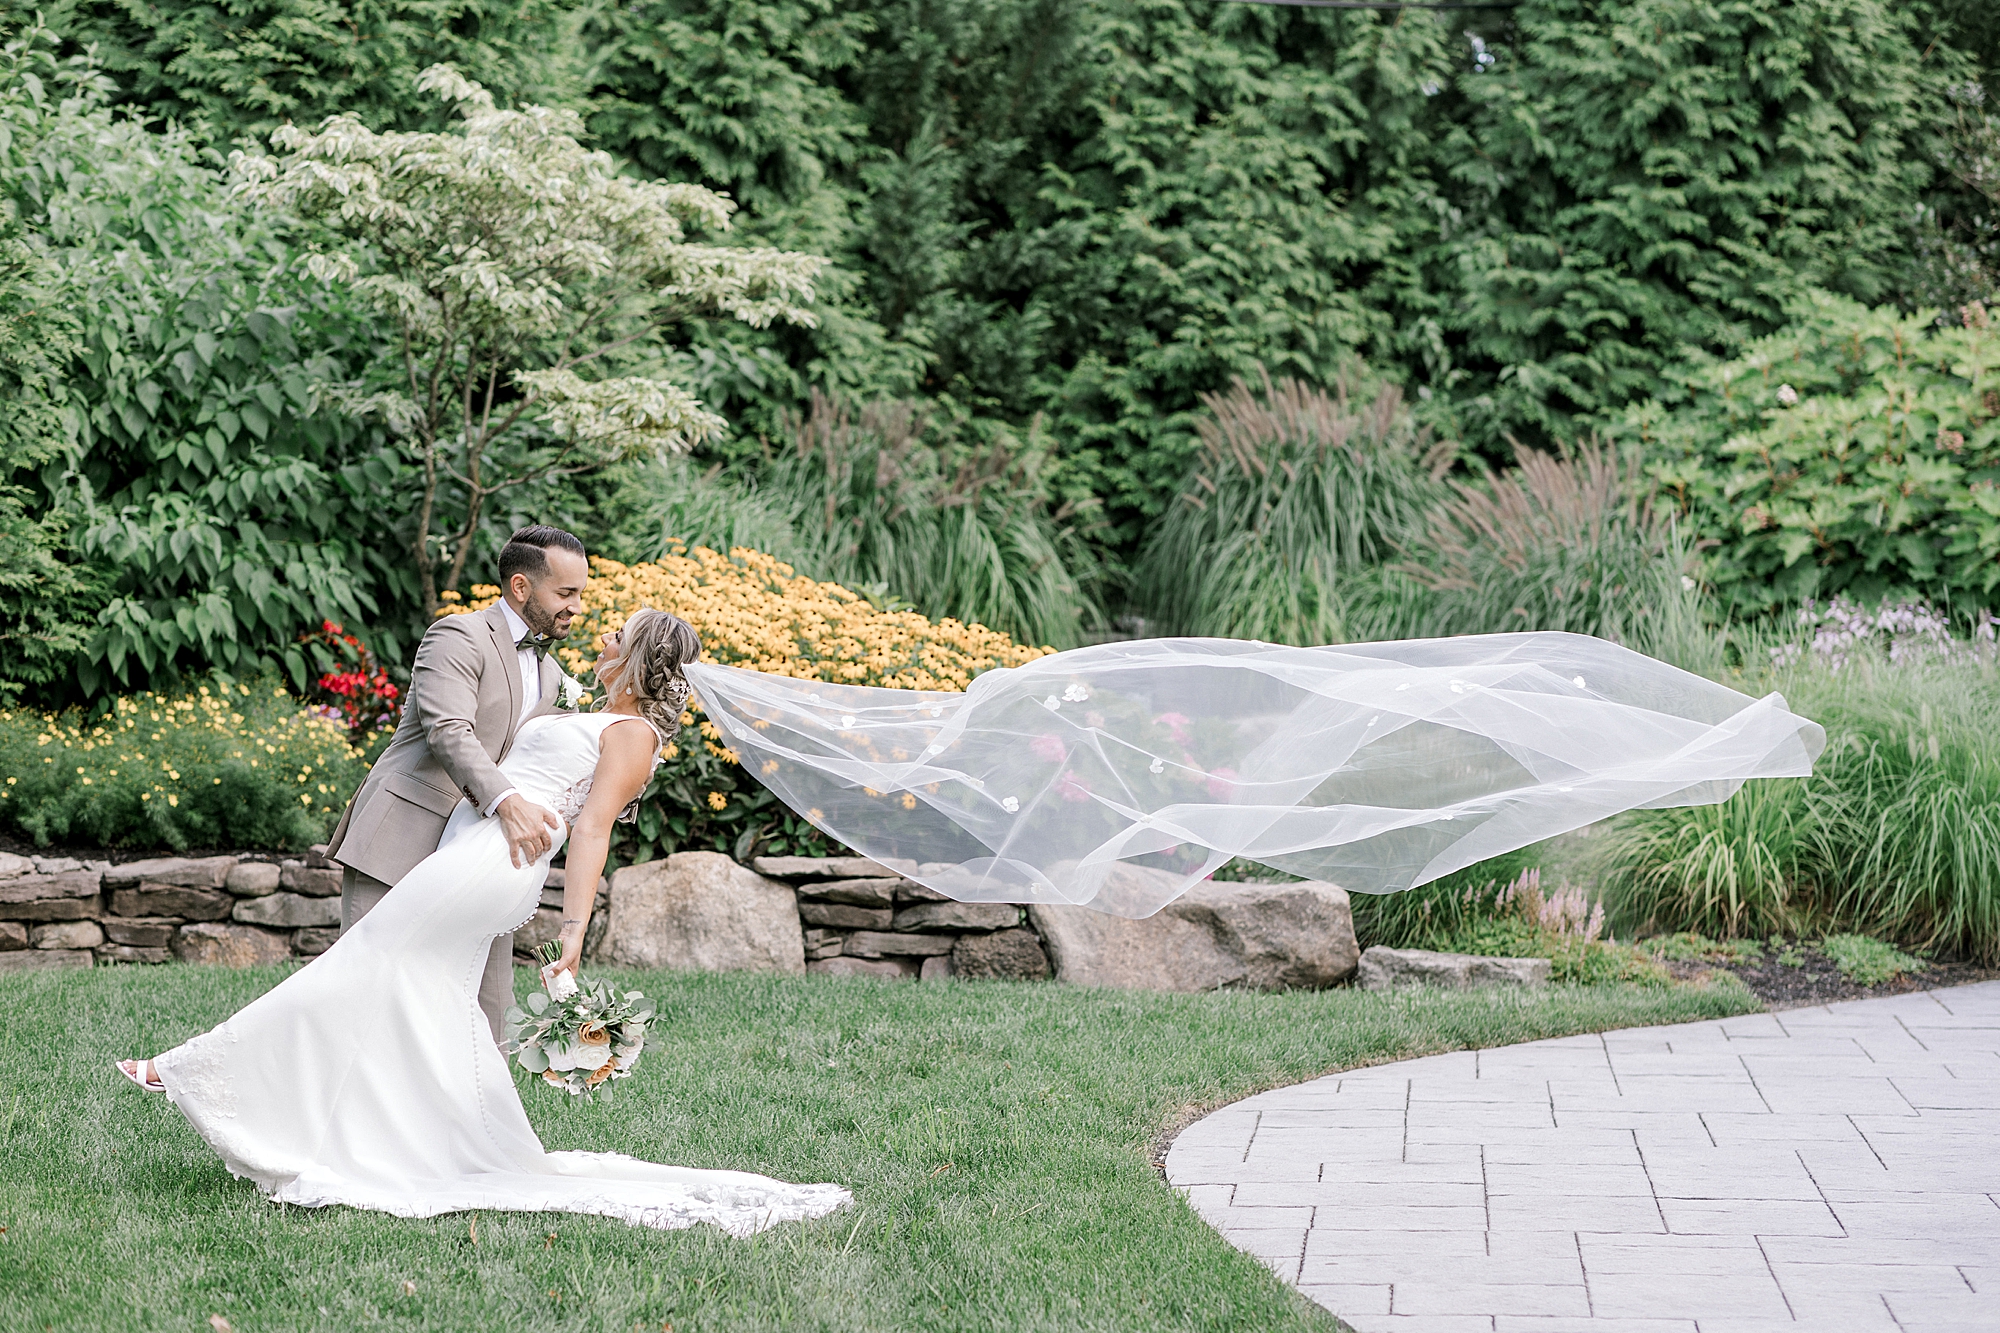 newlyweds kiss while bride's veil floats behind them